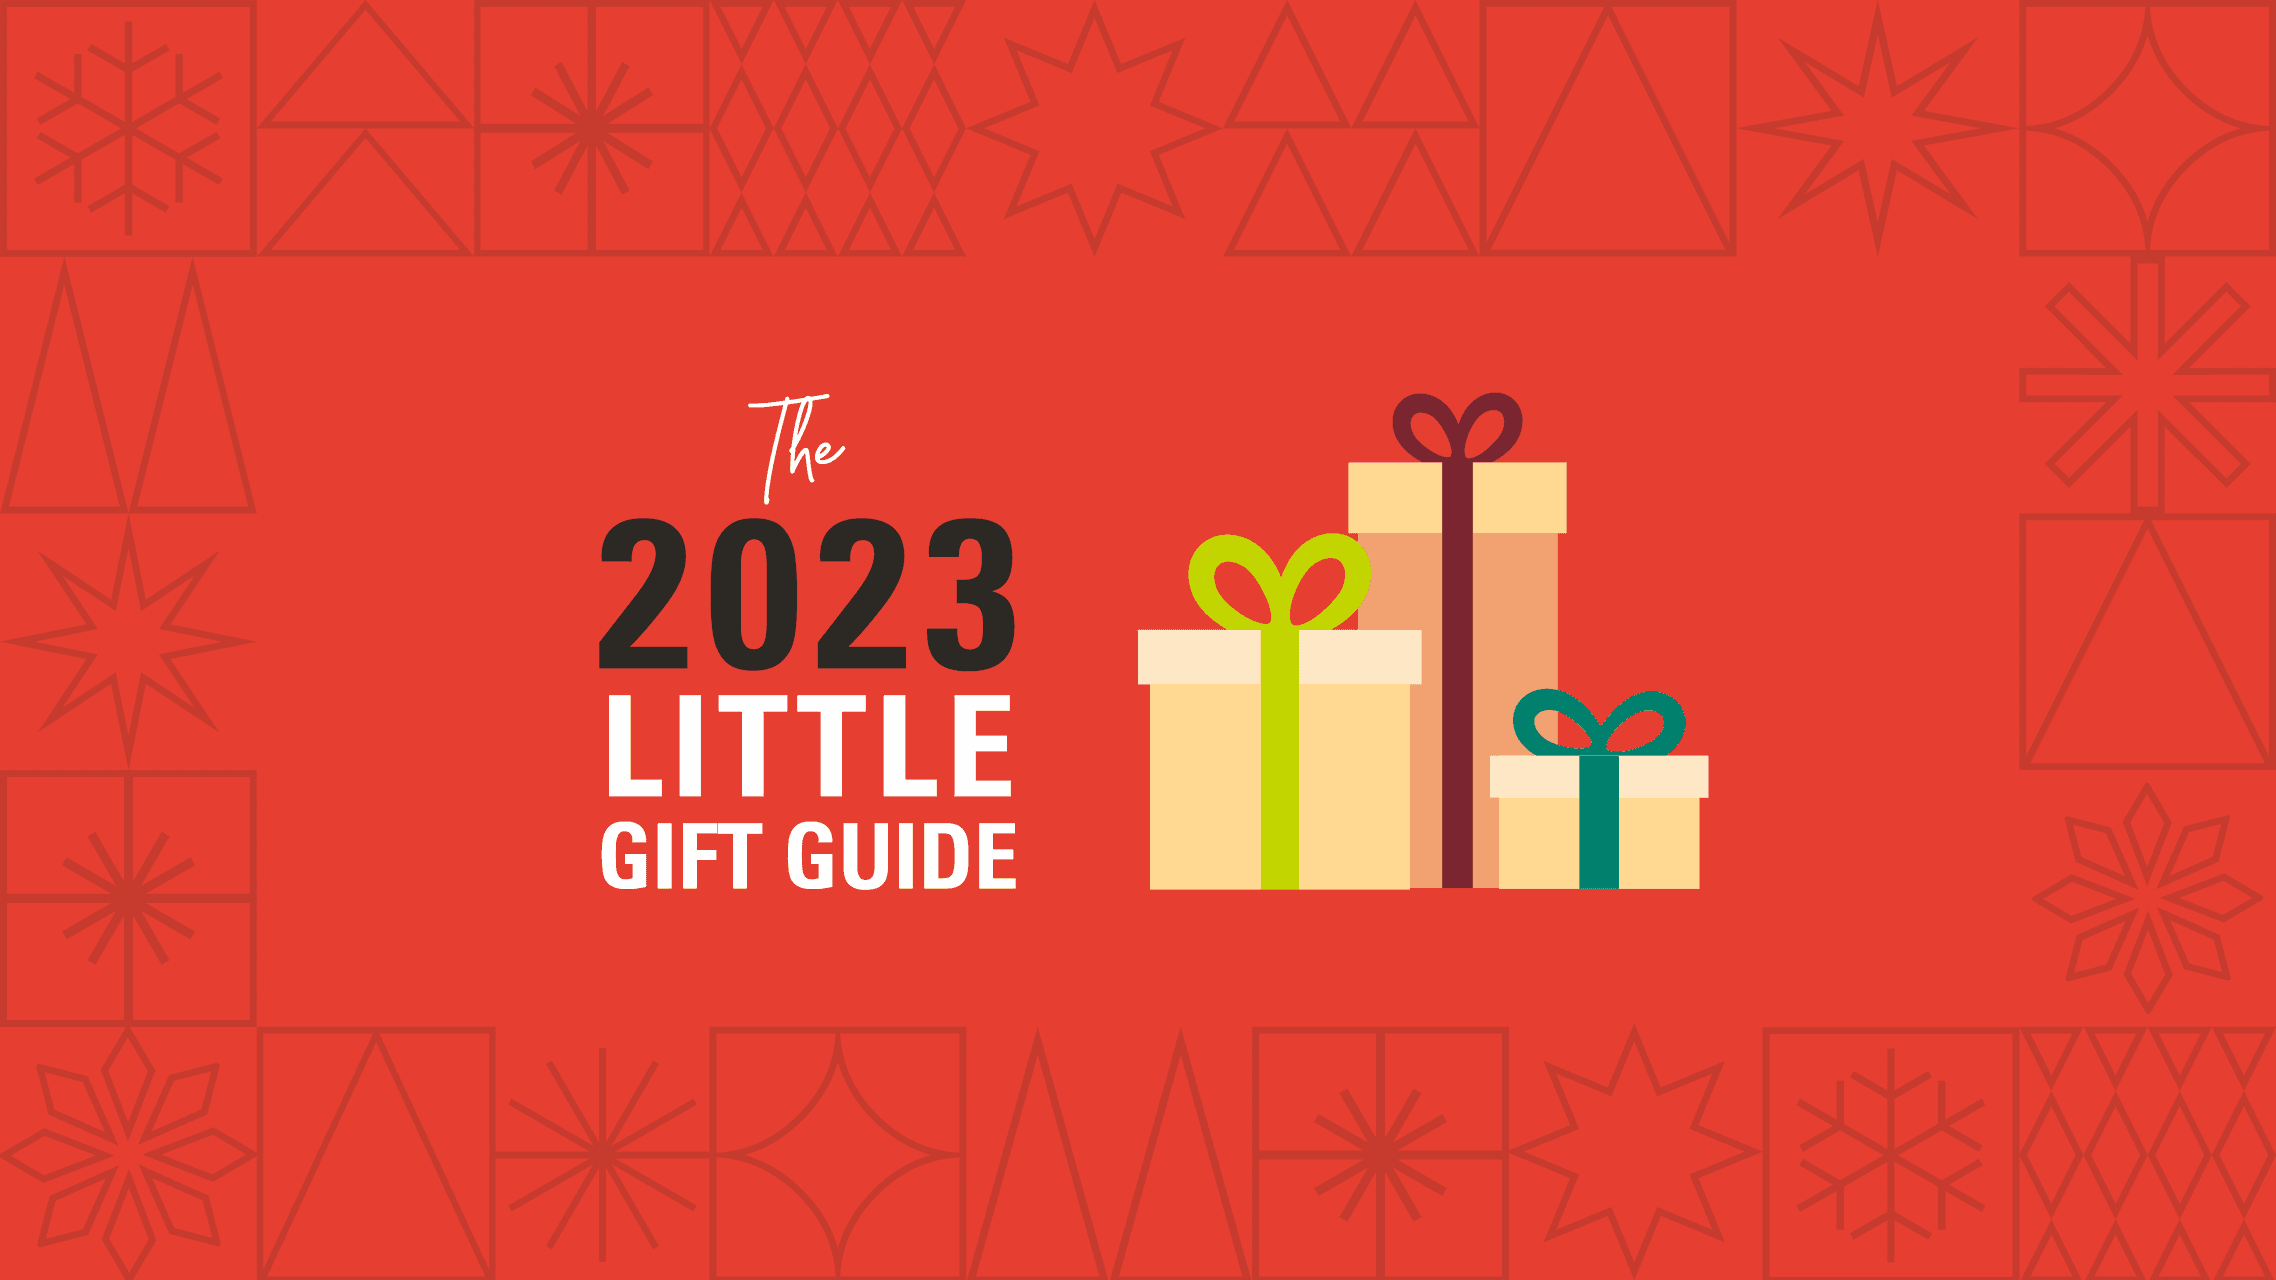 The 2023 Little Gift Guide for Aspiring Architects, Engineers & Designers